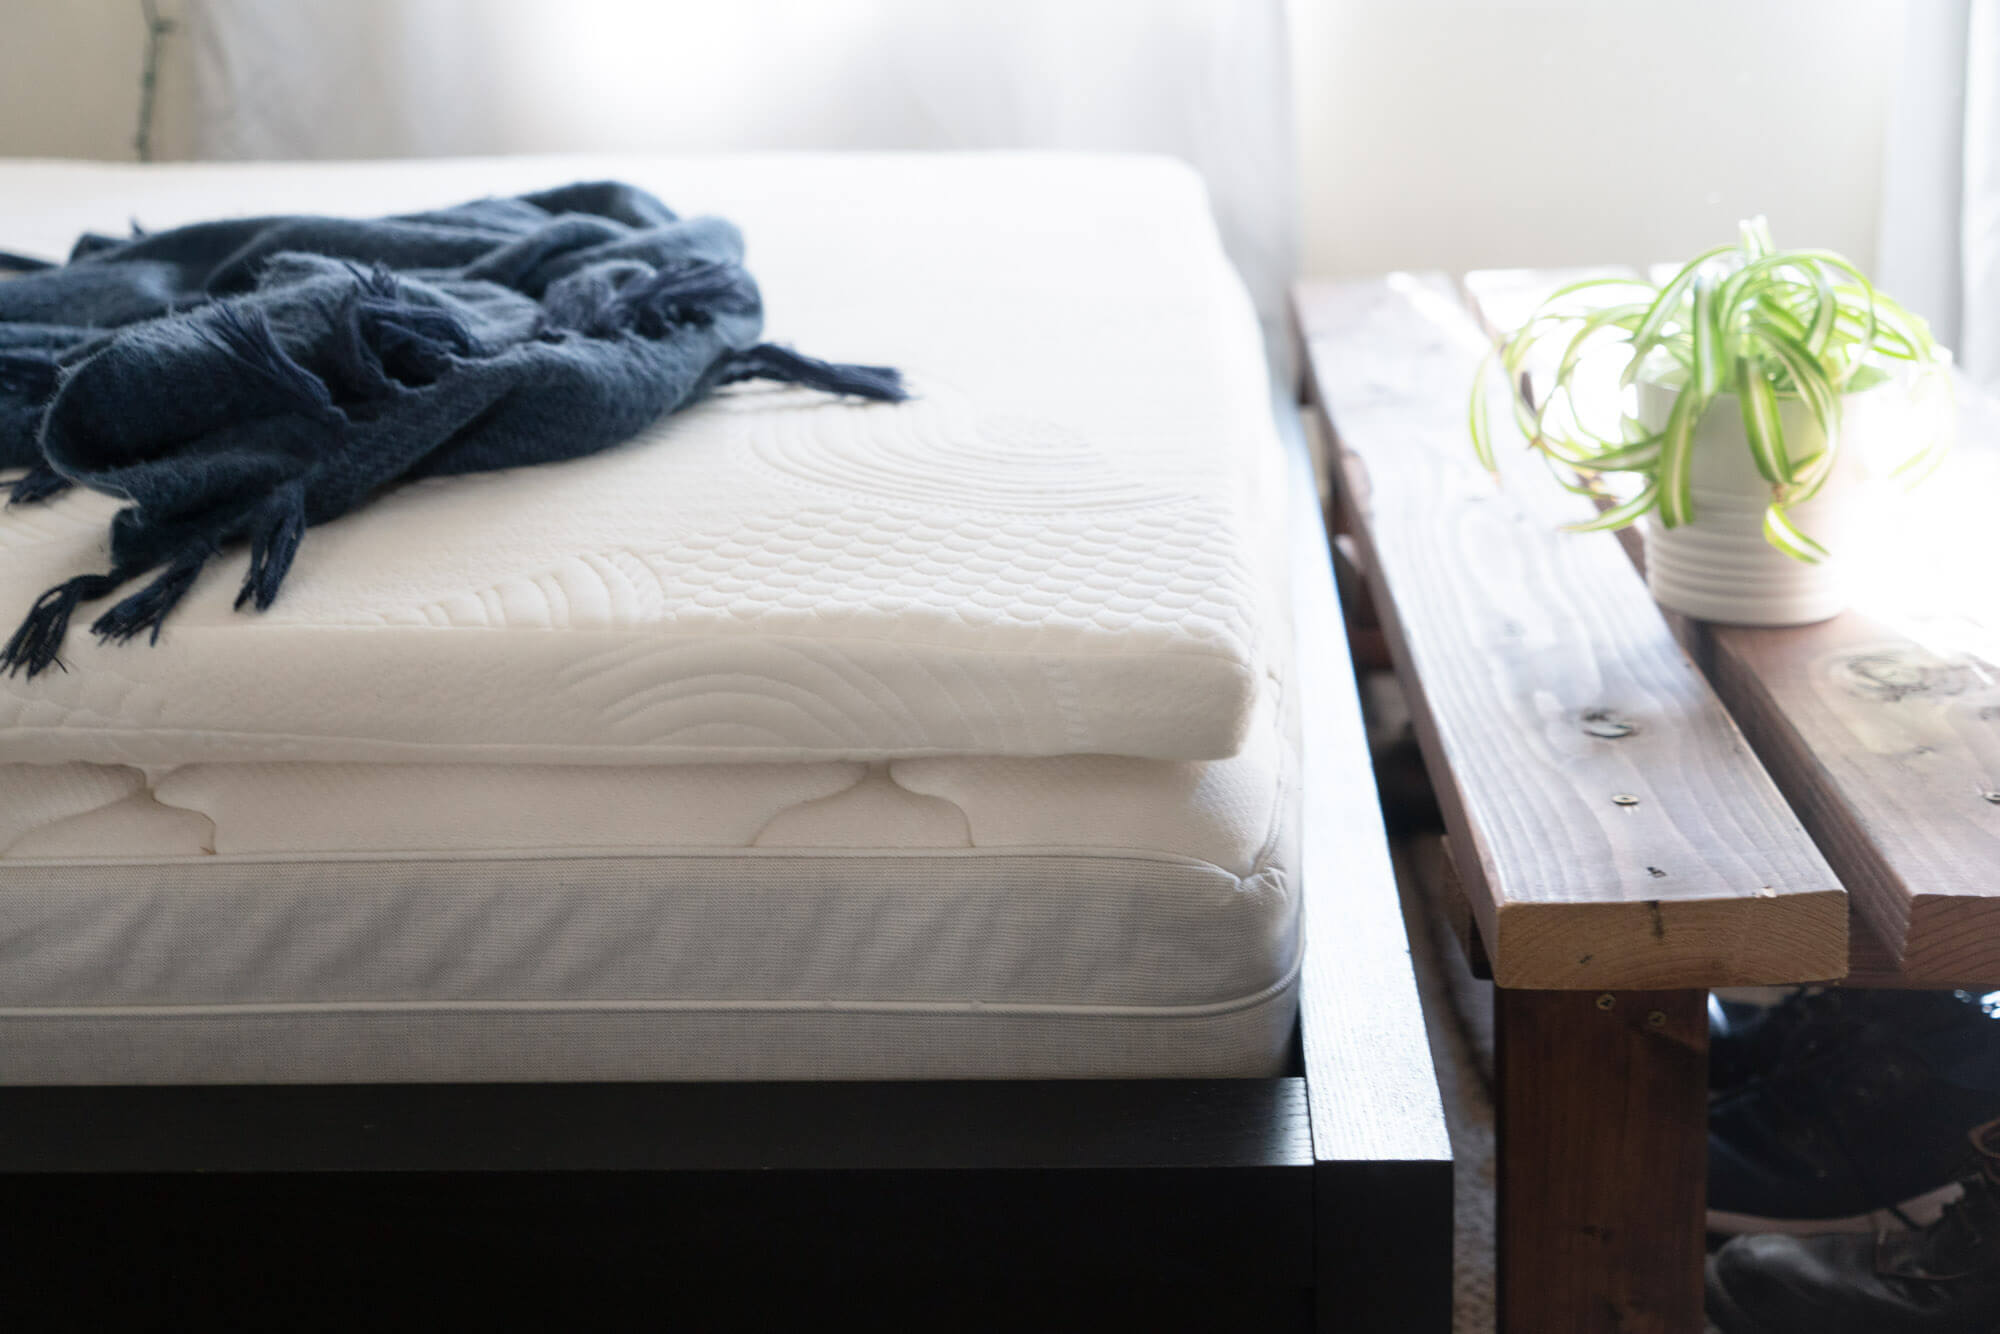 Organic Textiles mattress topper placed on bed